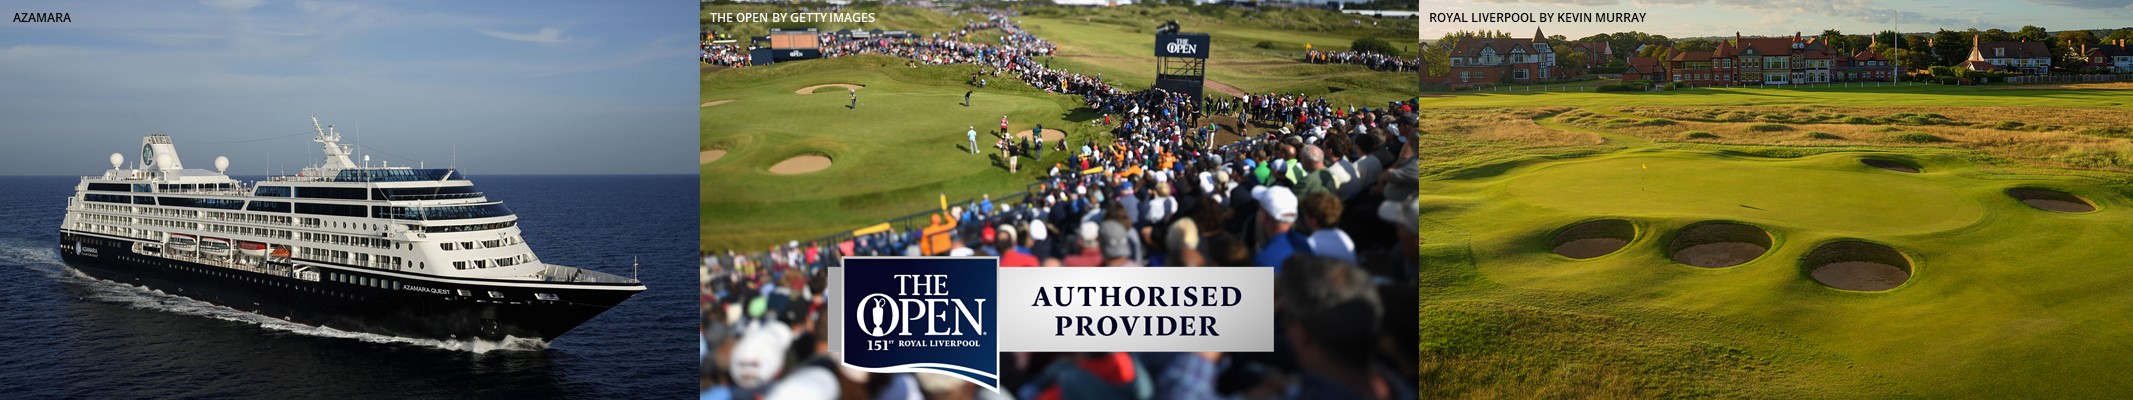 The 151st Open Championship at Royal Liverpool Golf Vacation Packages